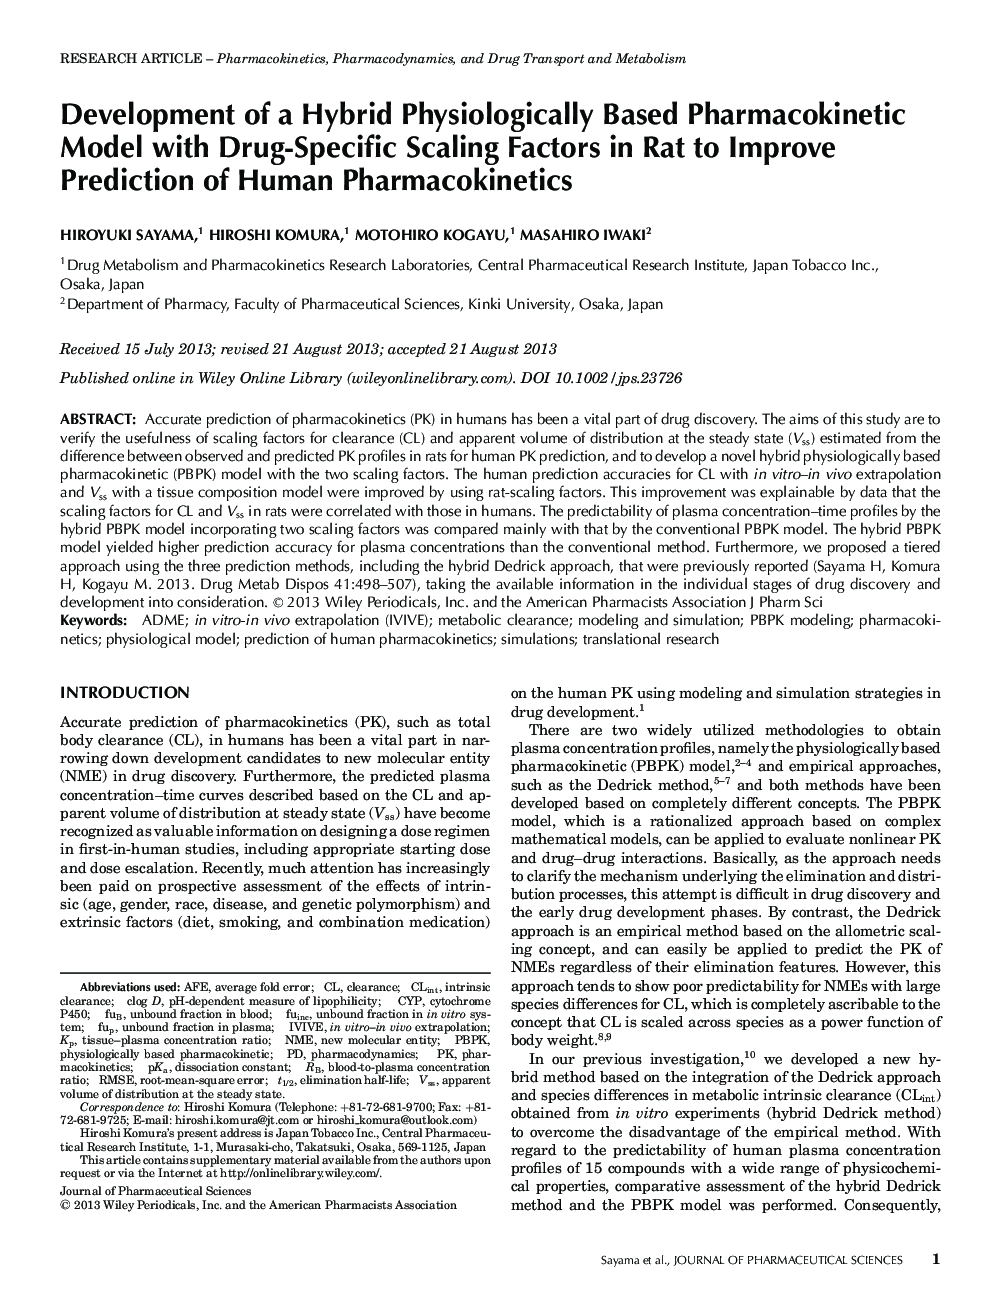 Development of a Hybrid Physiologically Based Pharmacokinetic Model with DrugâSpecific Scaling Factors in Rat to Improve Prediction of Human Pharmacokinetics